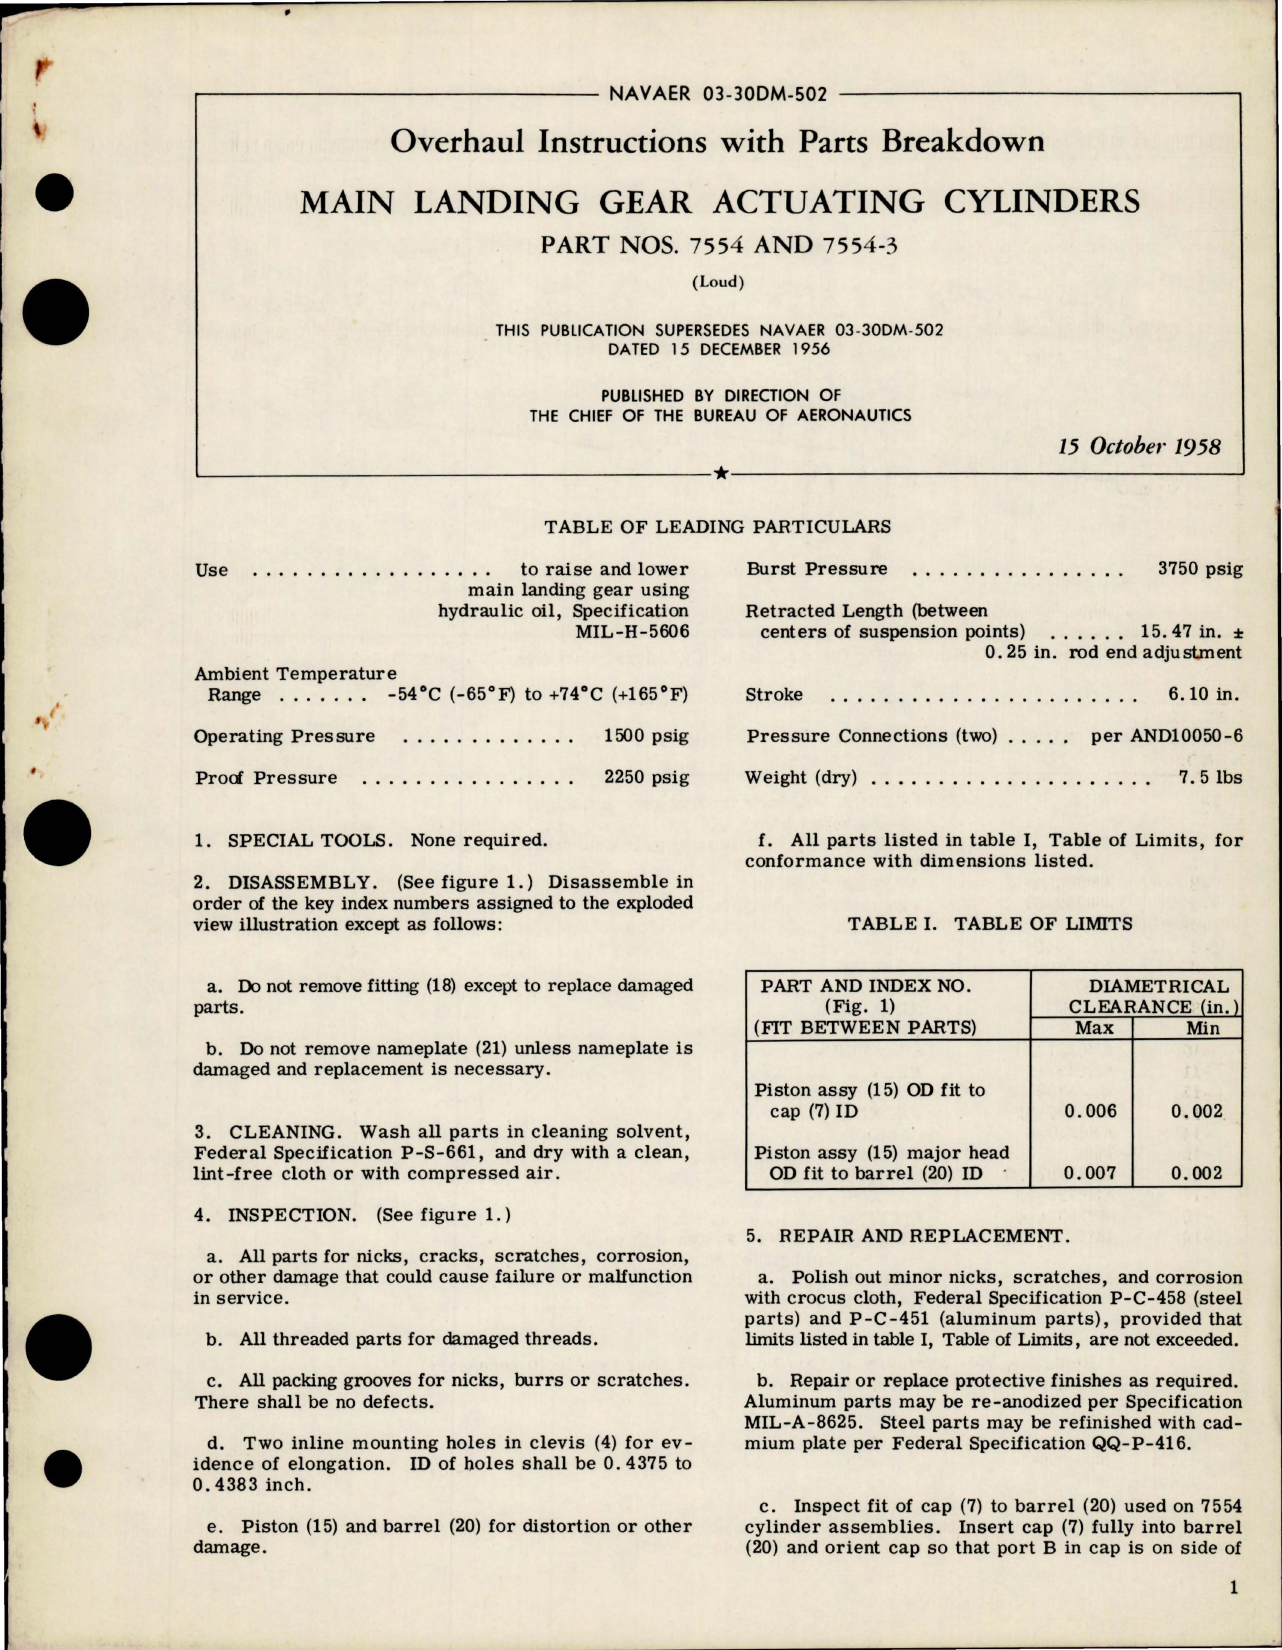 Sample page 1 from AirCorps Library document: Overhaul Instructions with Parts Breakdown for Main Landing Gear Actuating Cylinders - Parts 7554 and 7554-3 